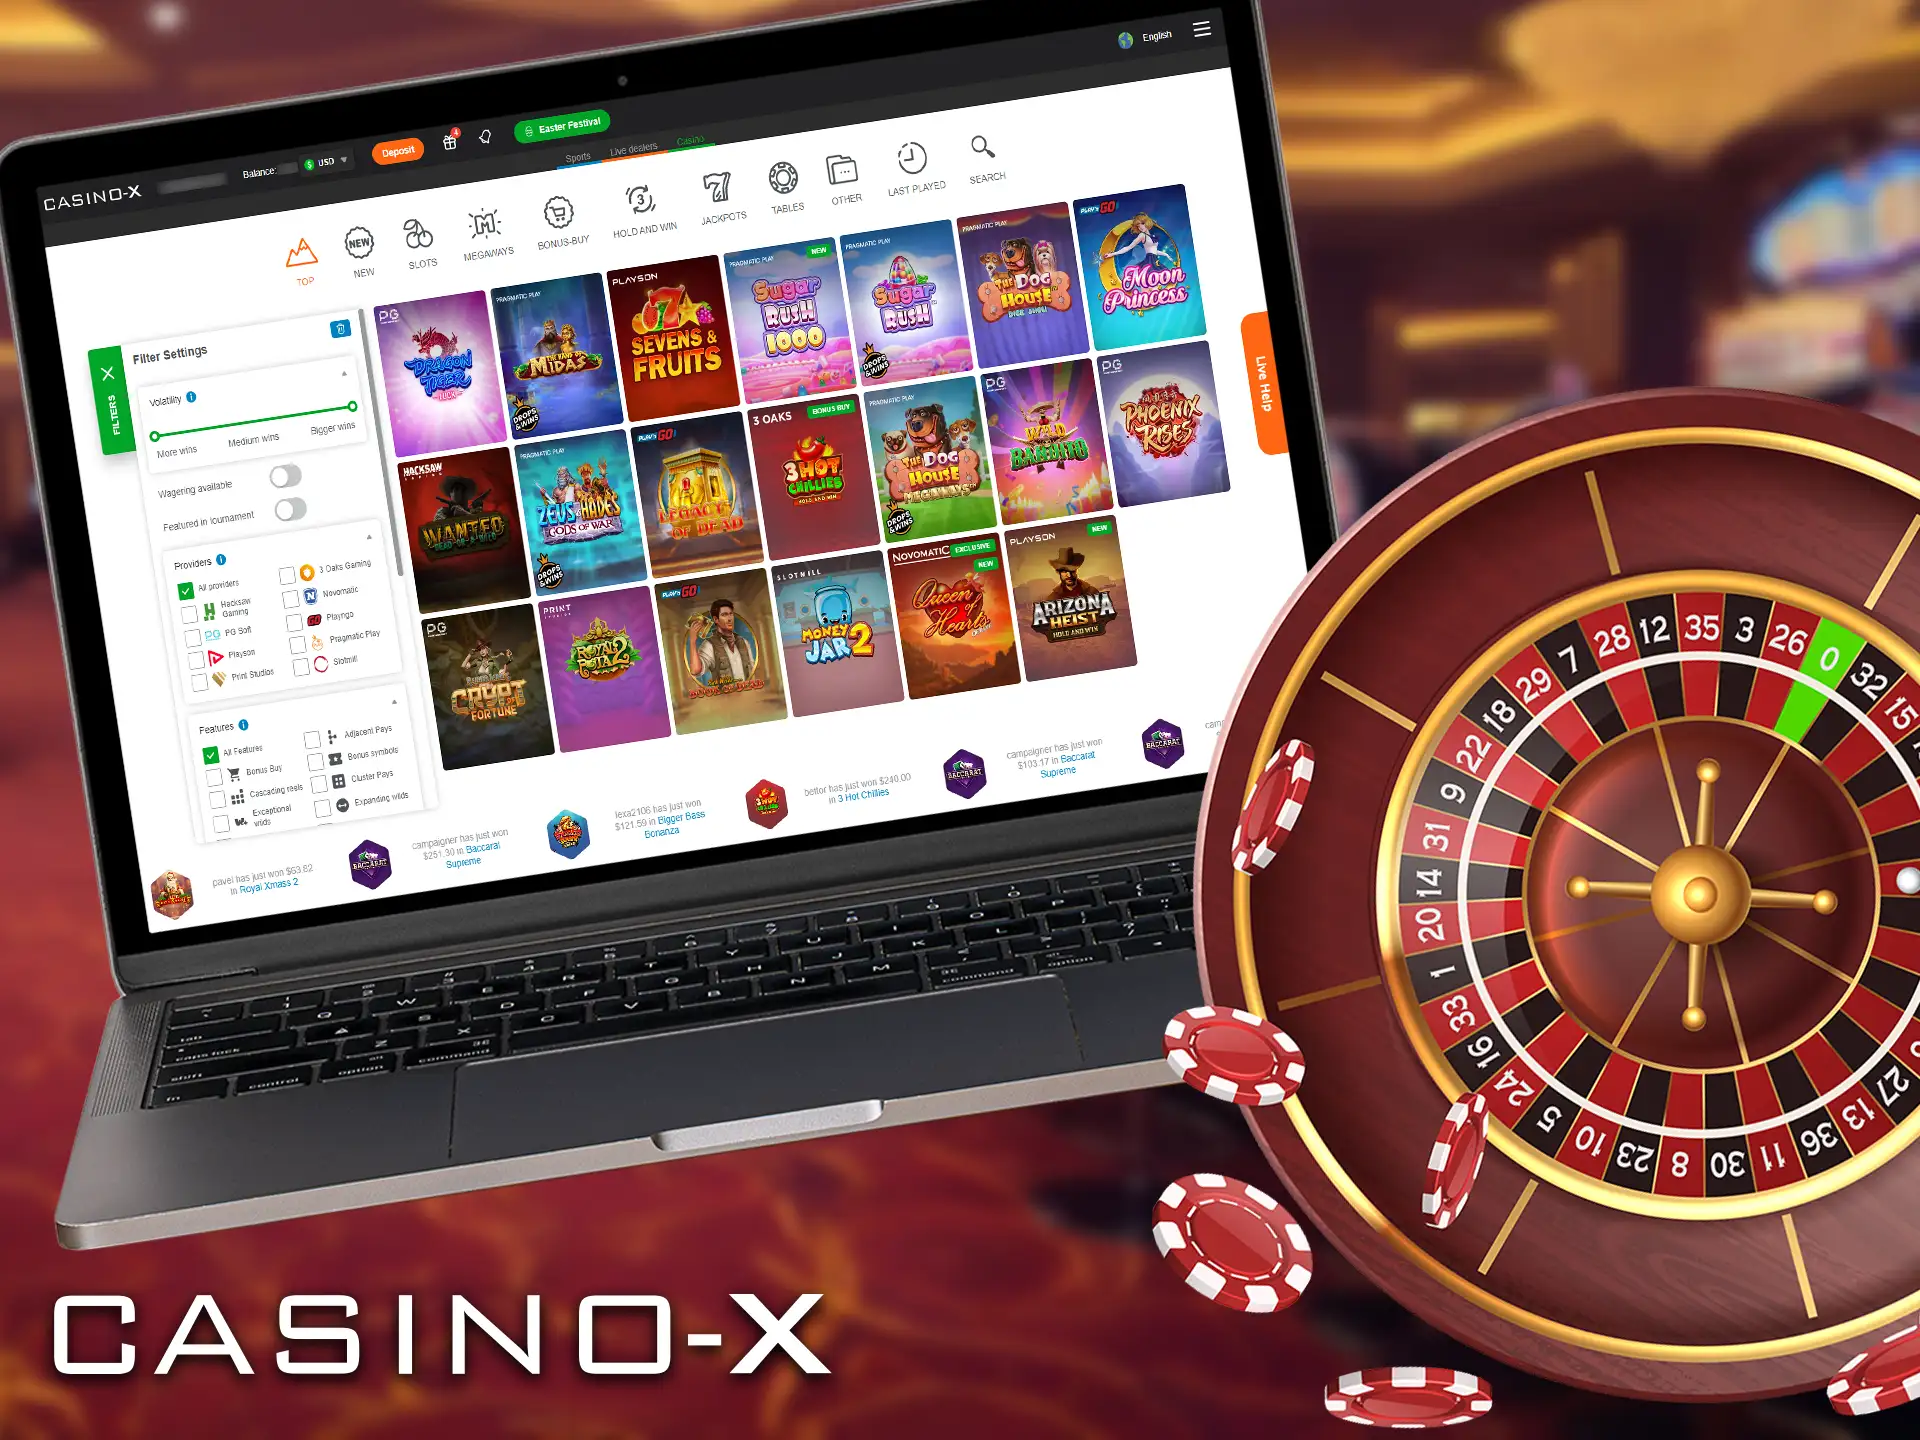 Casino-X offers a huge collection of top-notch casino games.